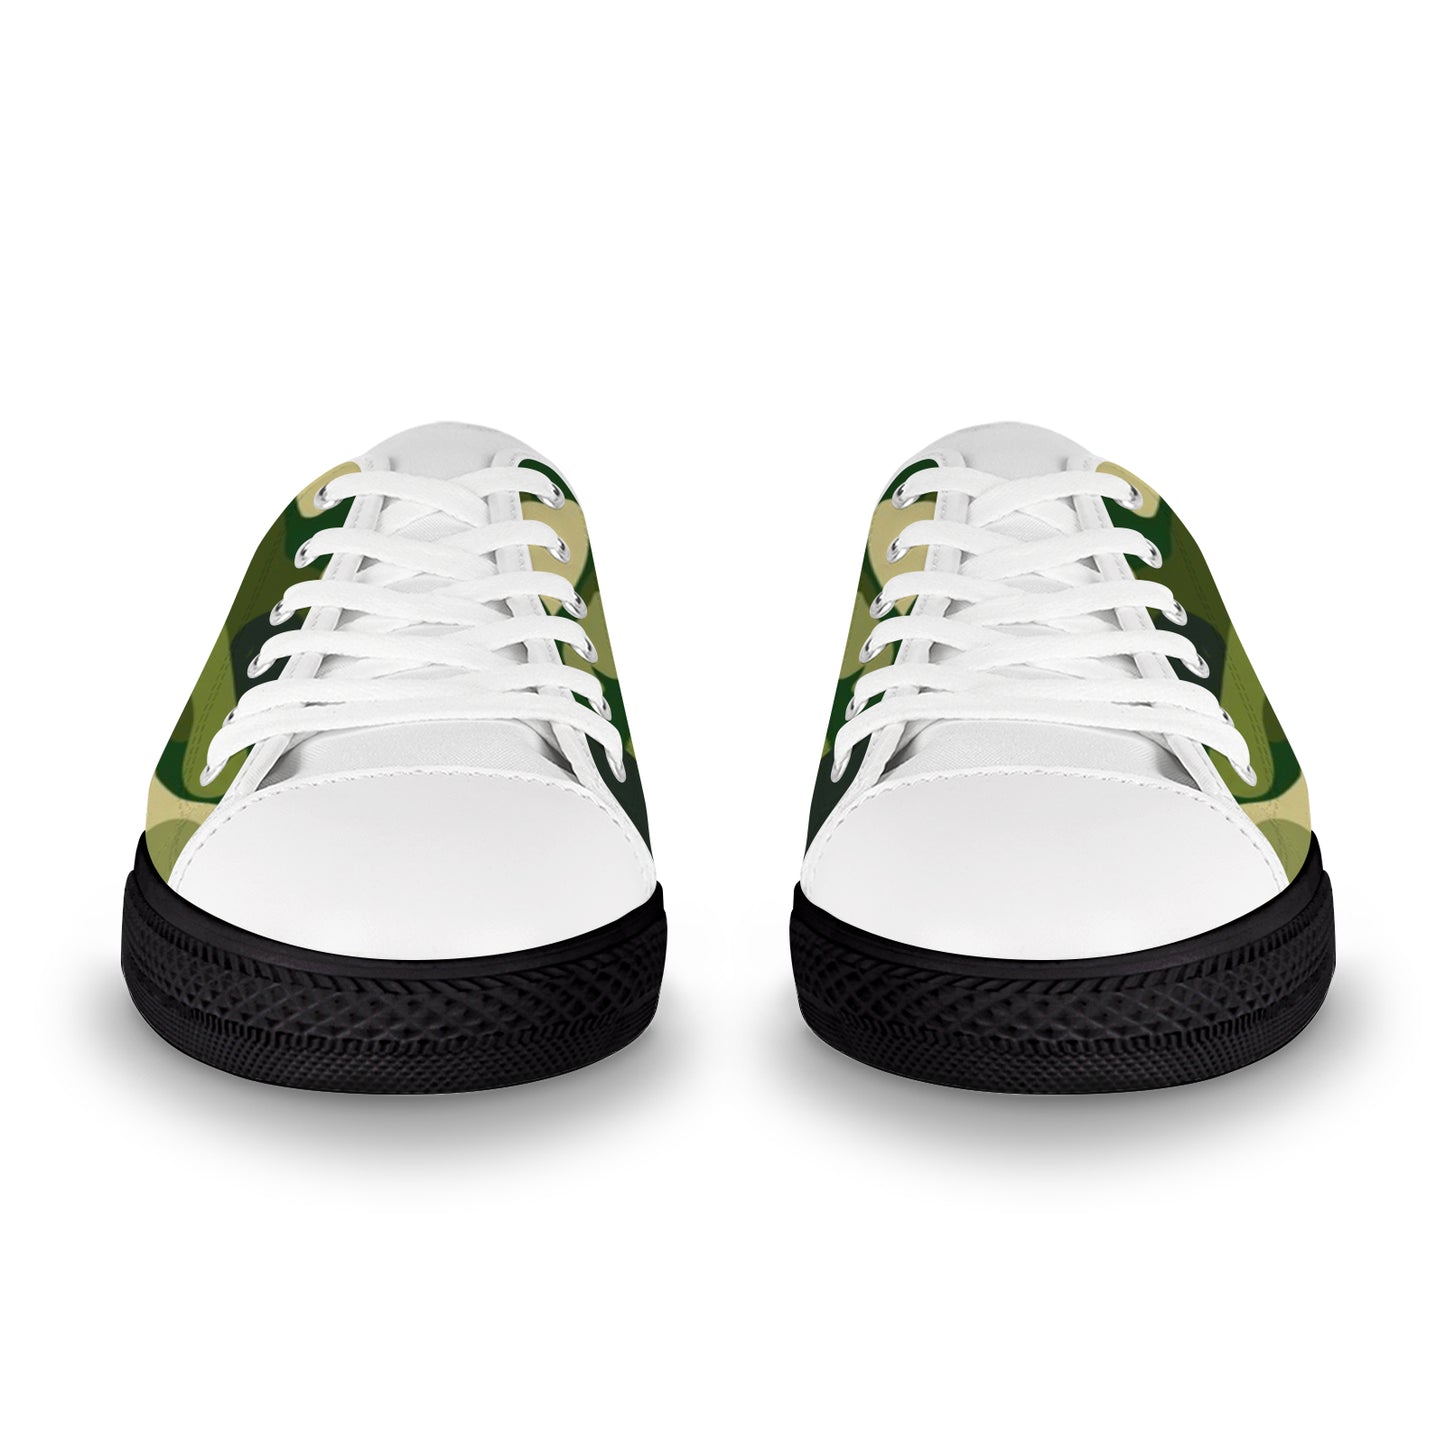 Men's Canvas Sneakers - Green Camouflage